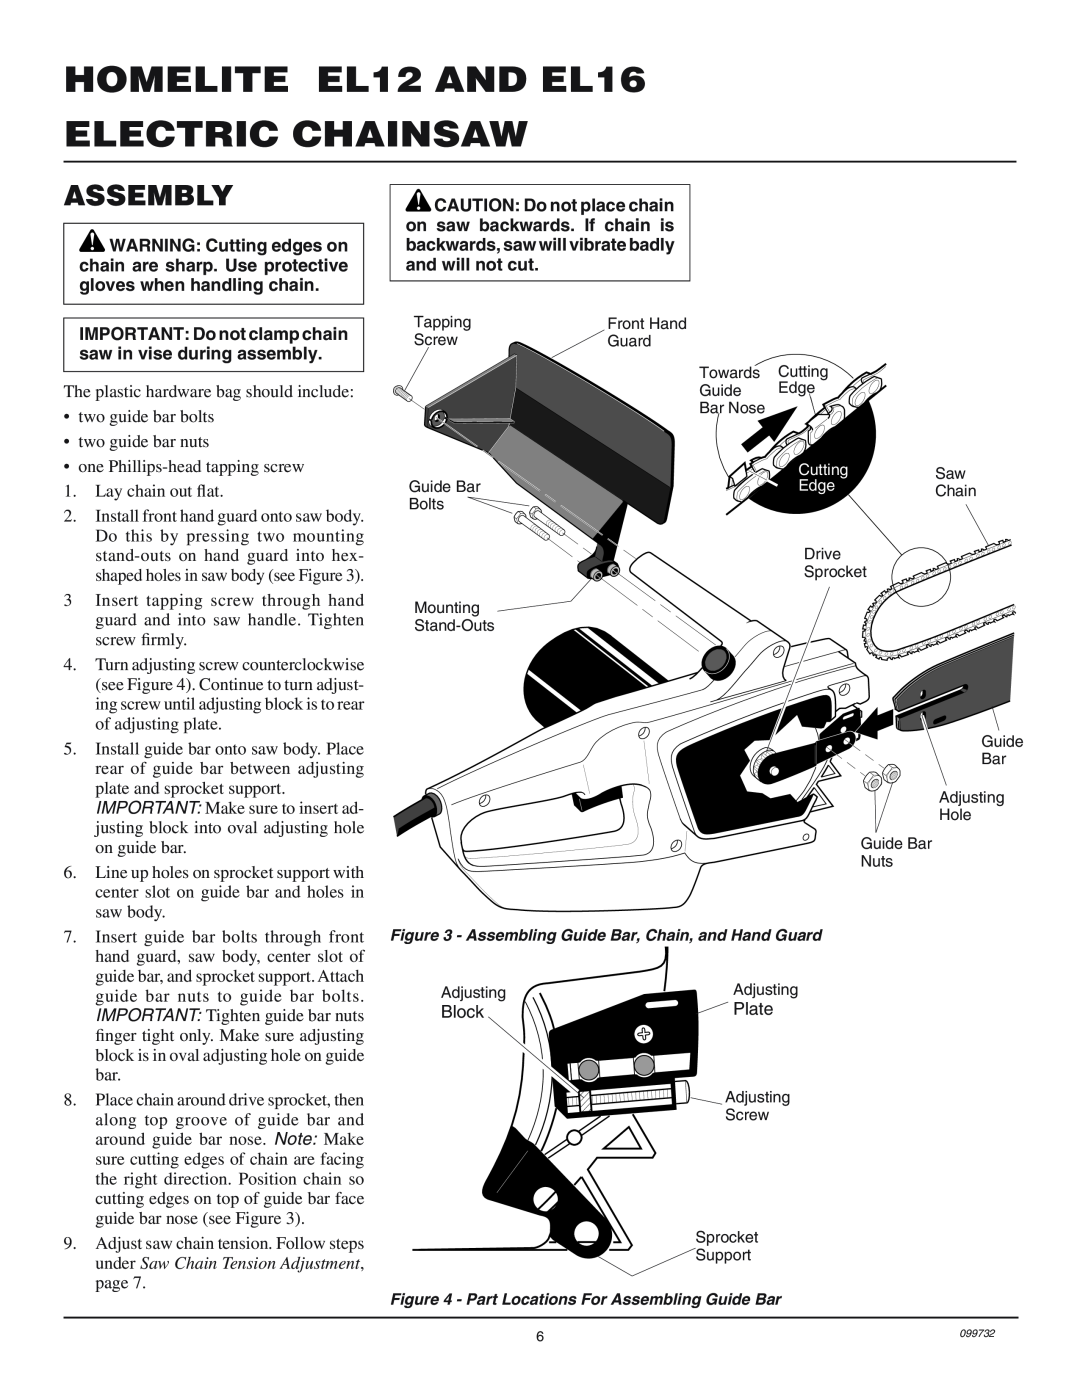 Homelite owner manual Assembly, HOMELITE EL12 AND EL16 ELECTRIC CHAINSAW 